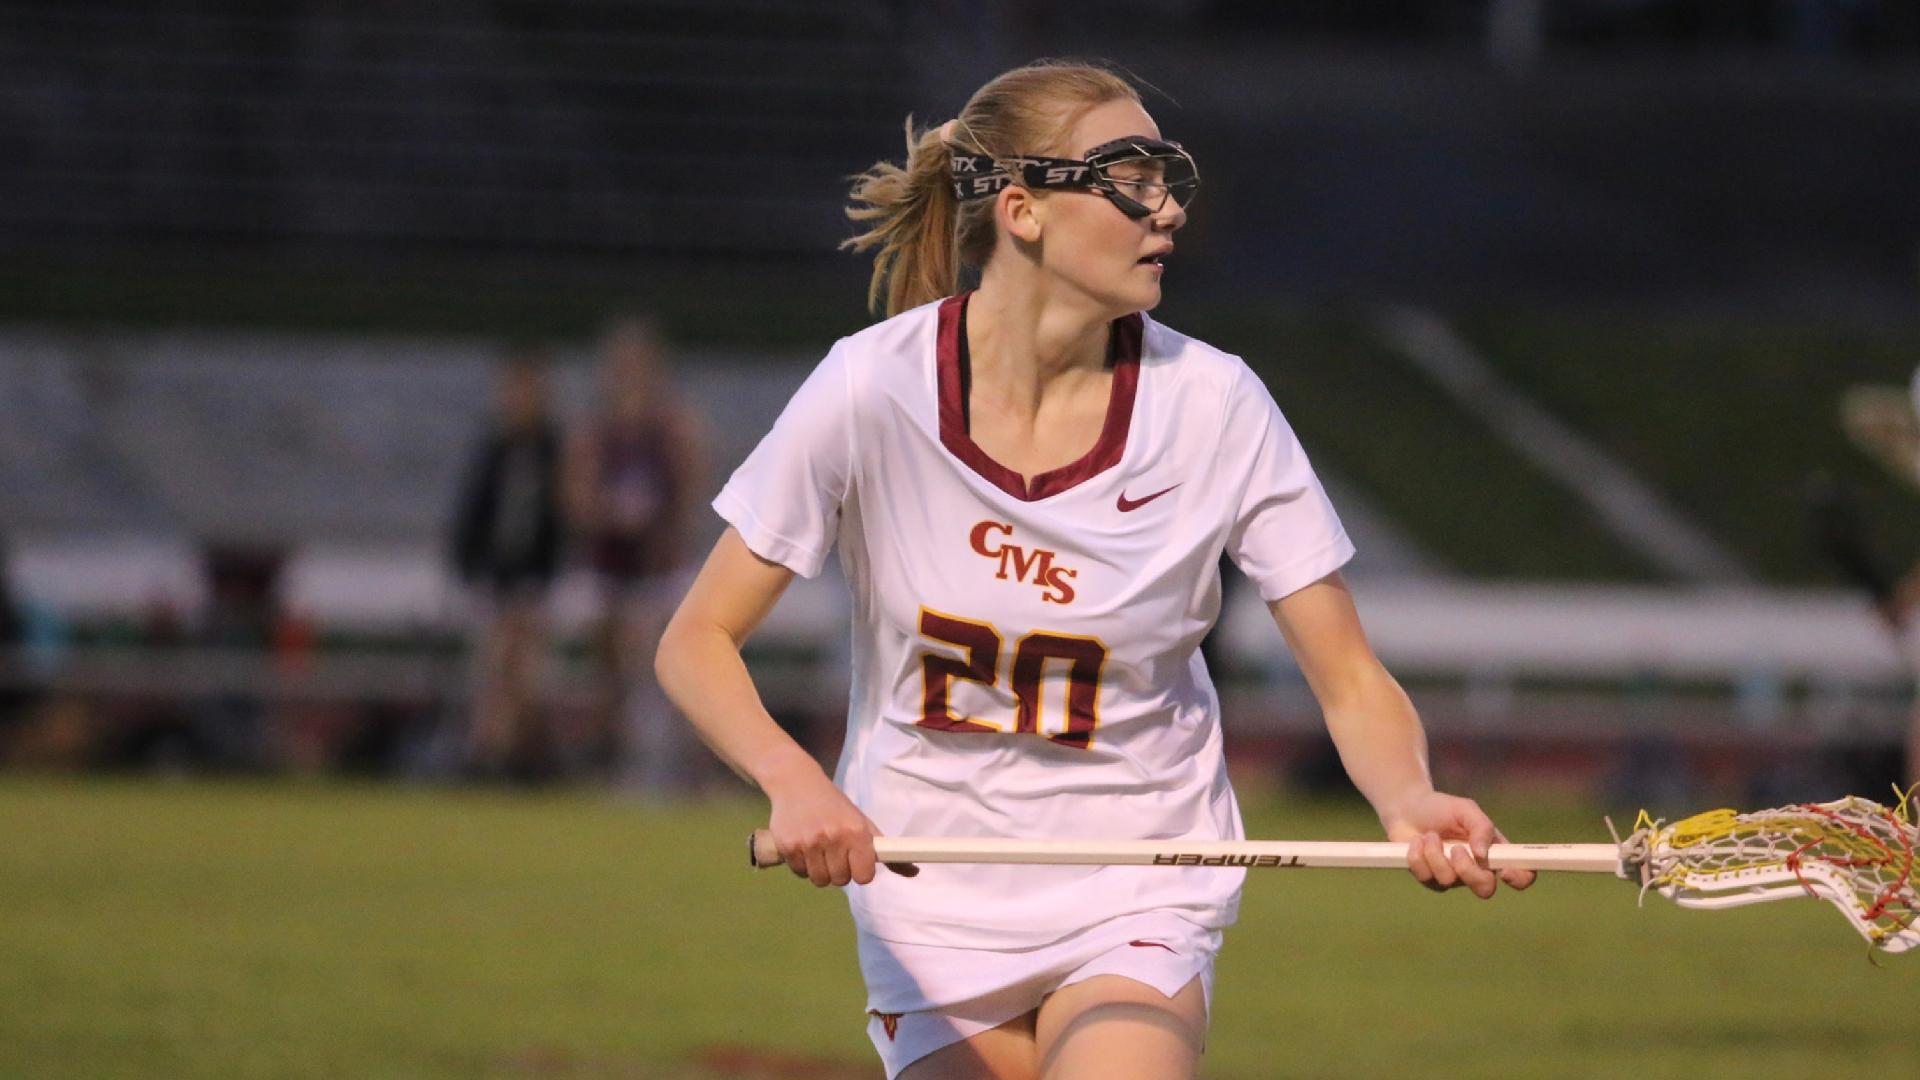 Catherine Murphy had four goals and three assists in a 23-2 win